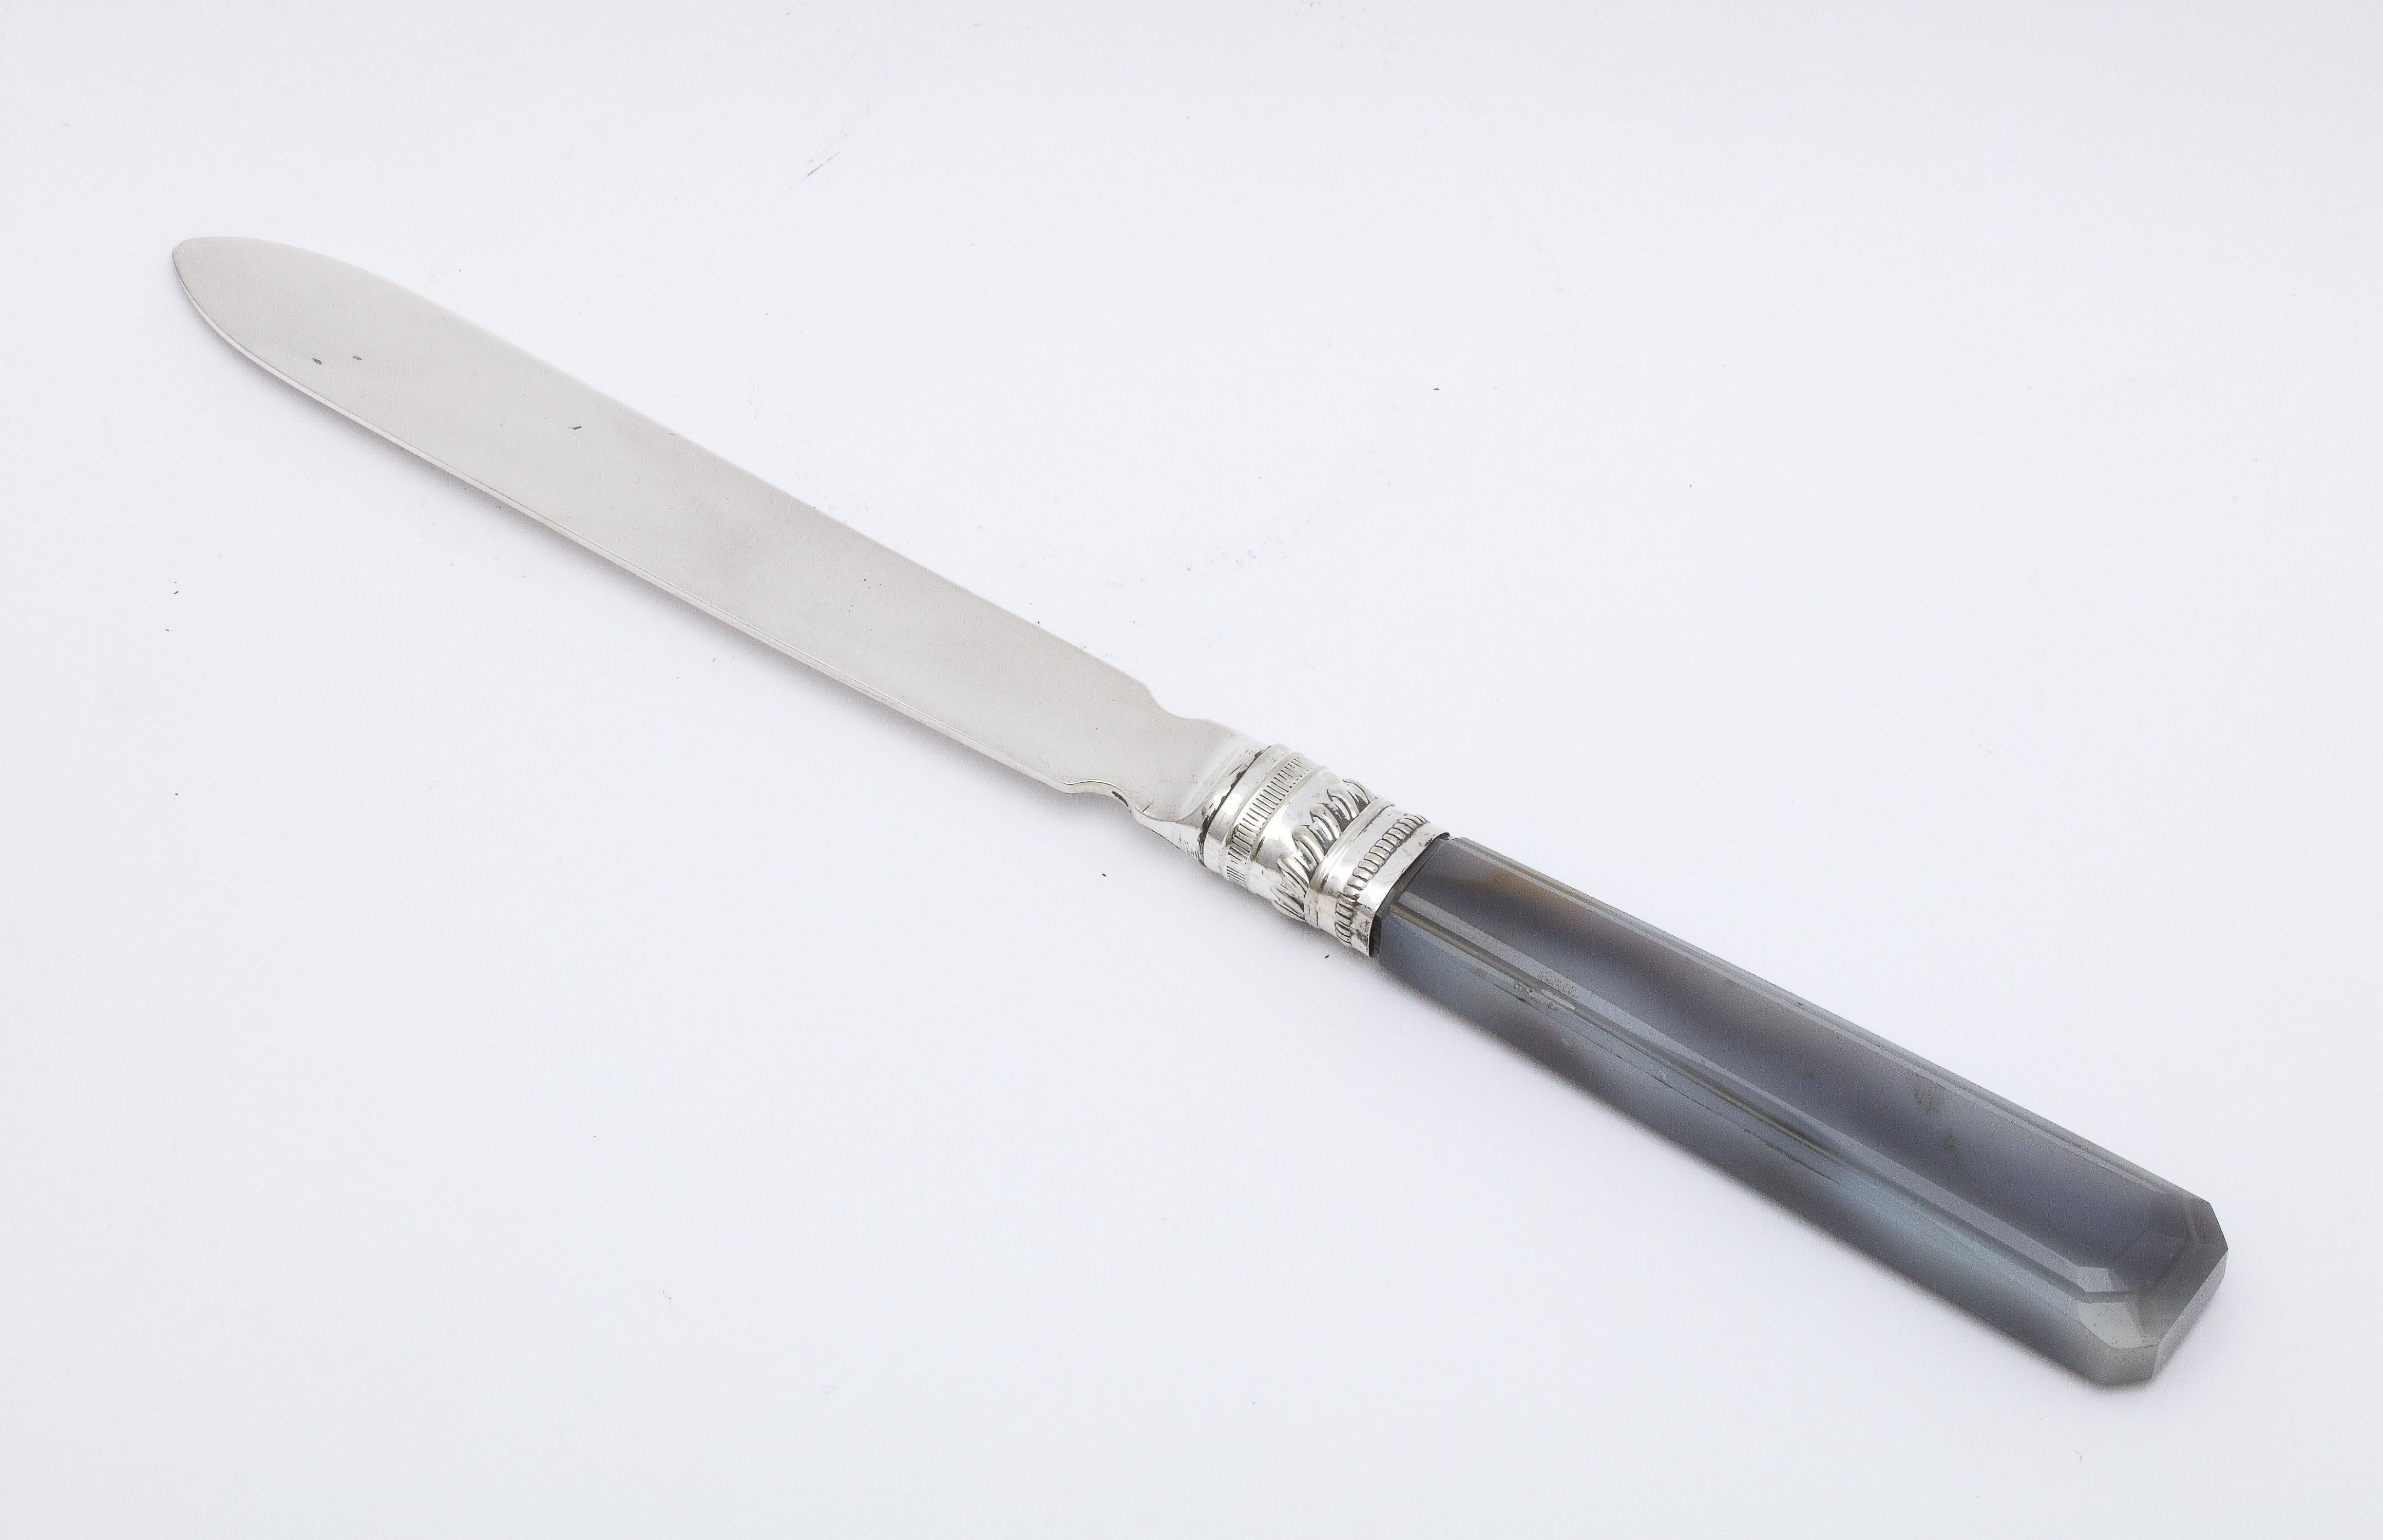 Edwardian, sterling silver and gray agate letter opener/paper knife, Sheffield, England, year-hallmarked for 1901, Mappin and Webb - makers. The agate has different shades of gray. Measures 8 1/2 inches long x 3/4 inches deep (at deepest point) x